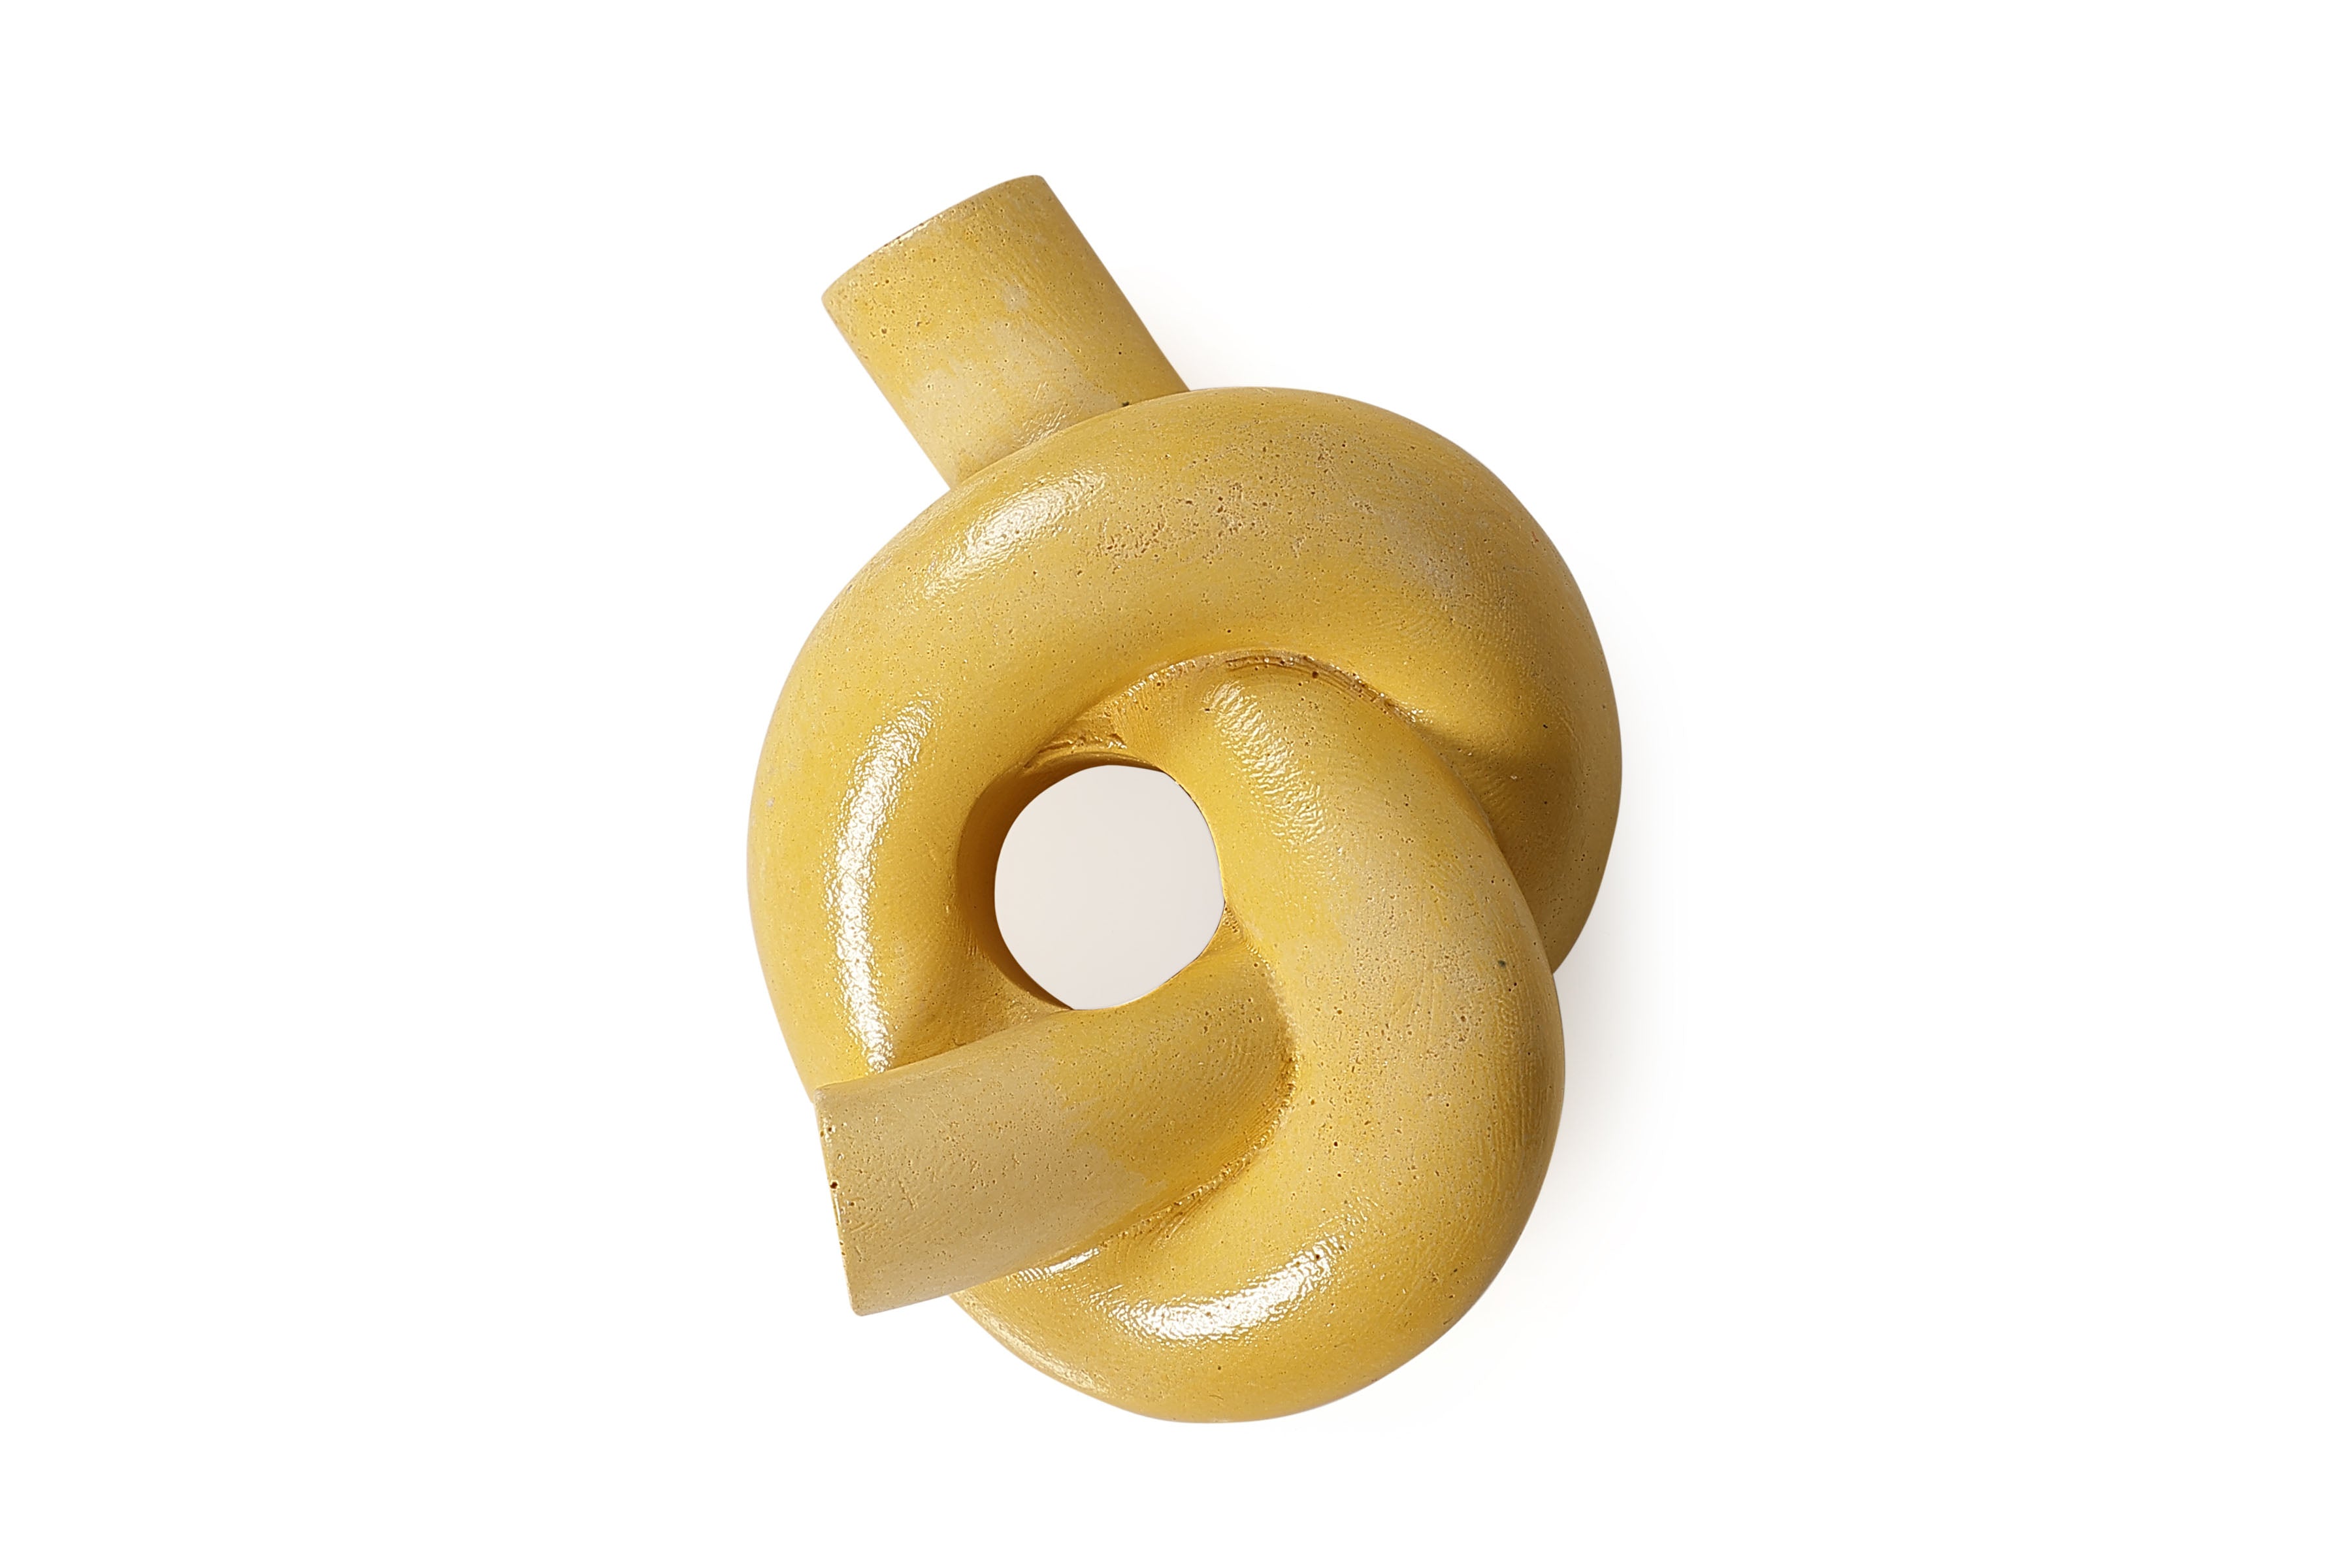 Nordic Style Knot Concrete Candle Holder - Mustard Yellow 3.2x4.5 Inch